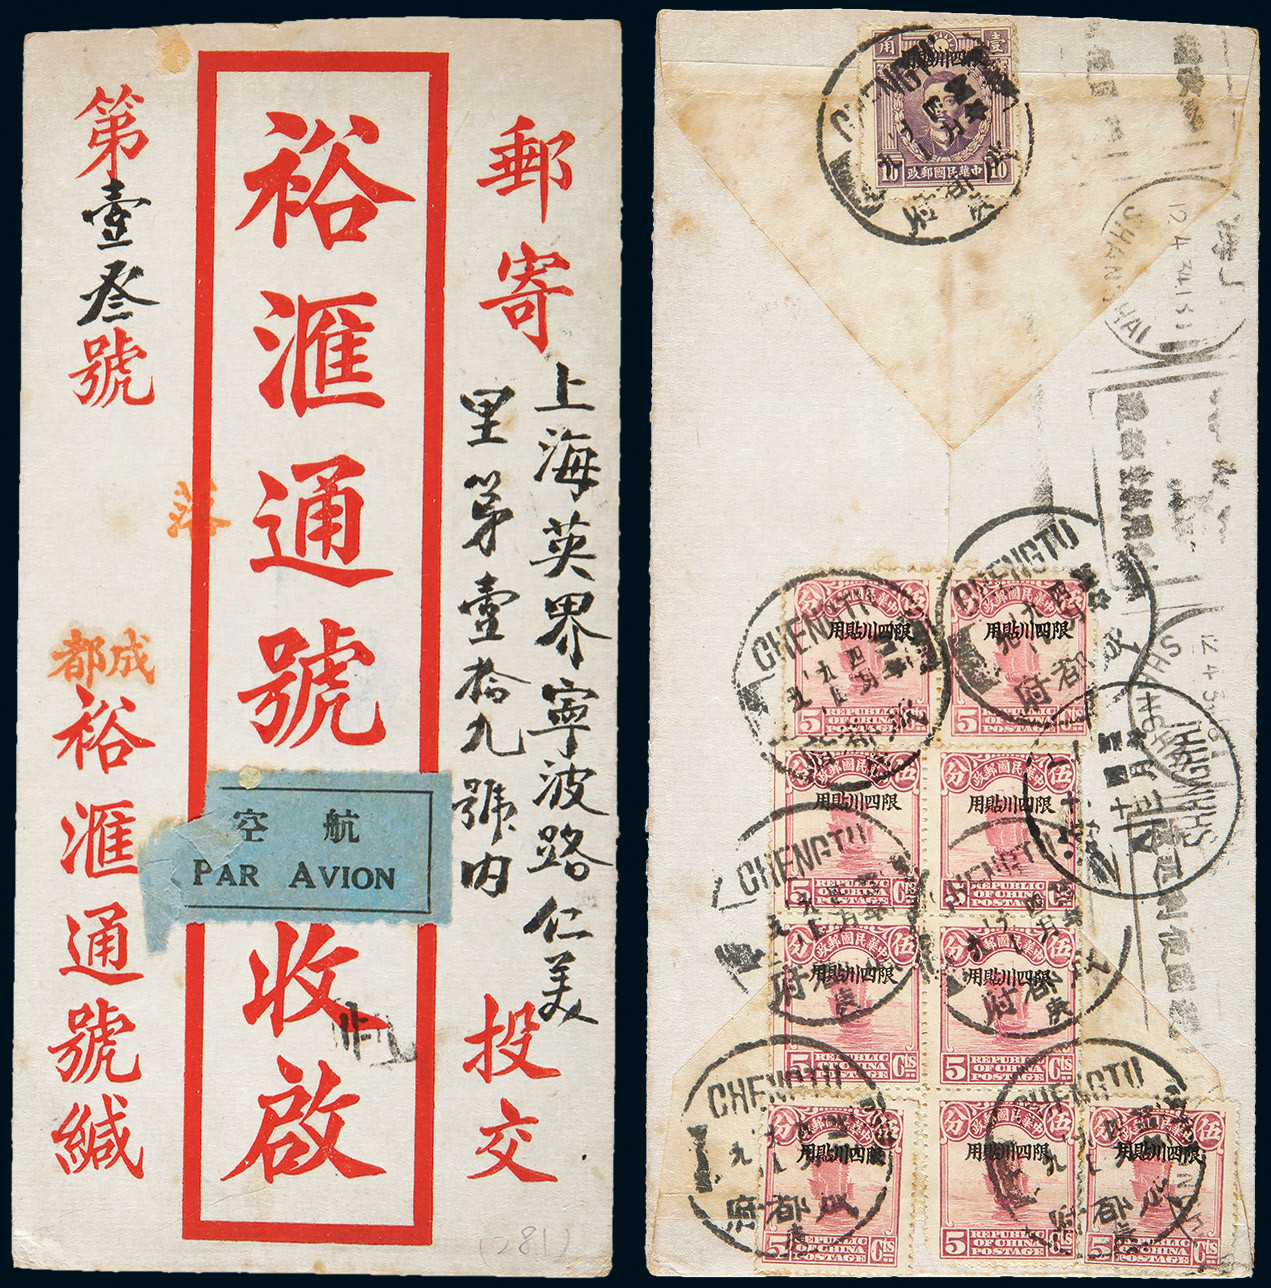 1923 Airmail cover sent from Chengdu to Shanghai.